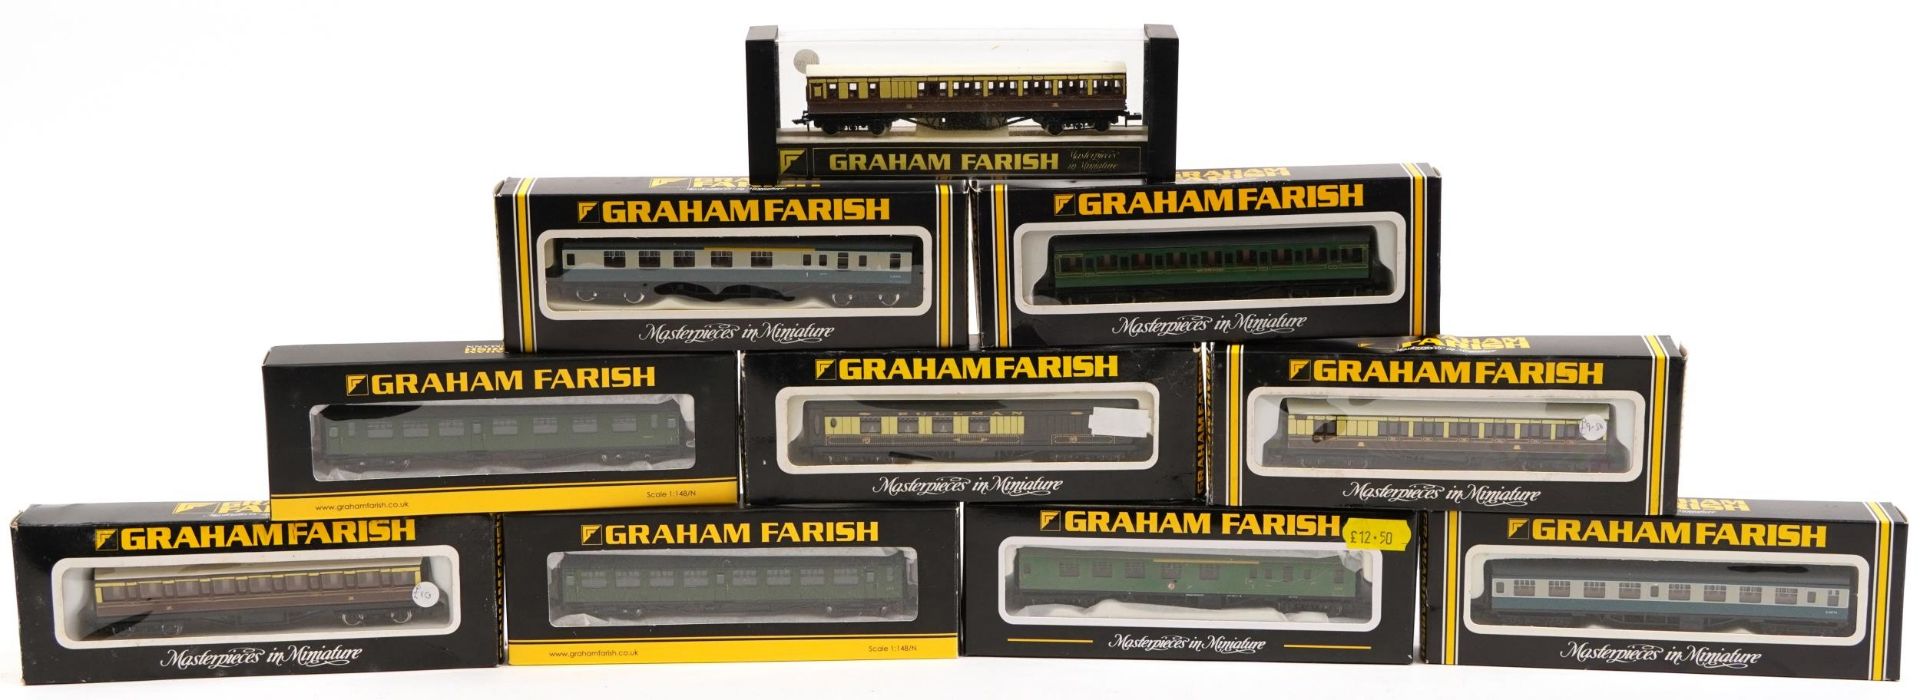 Ten Graham Farish N gauge model railway carriages with boxes, numbers 0614, 0623, 0624, 0634,